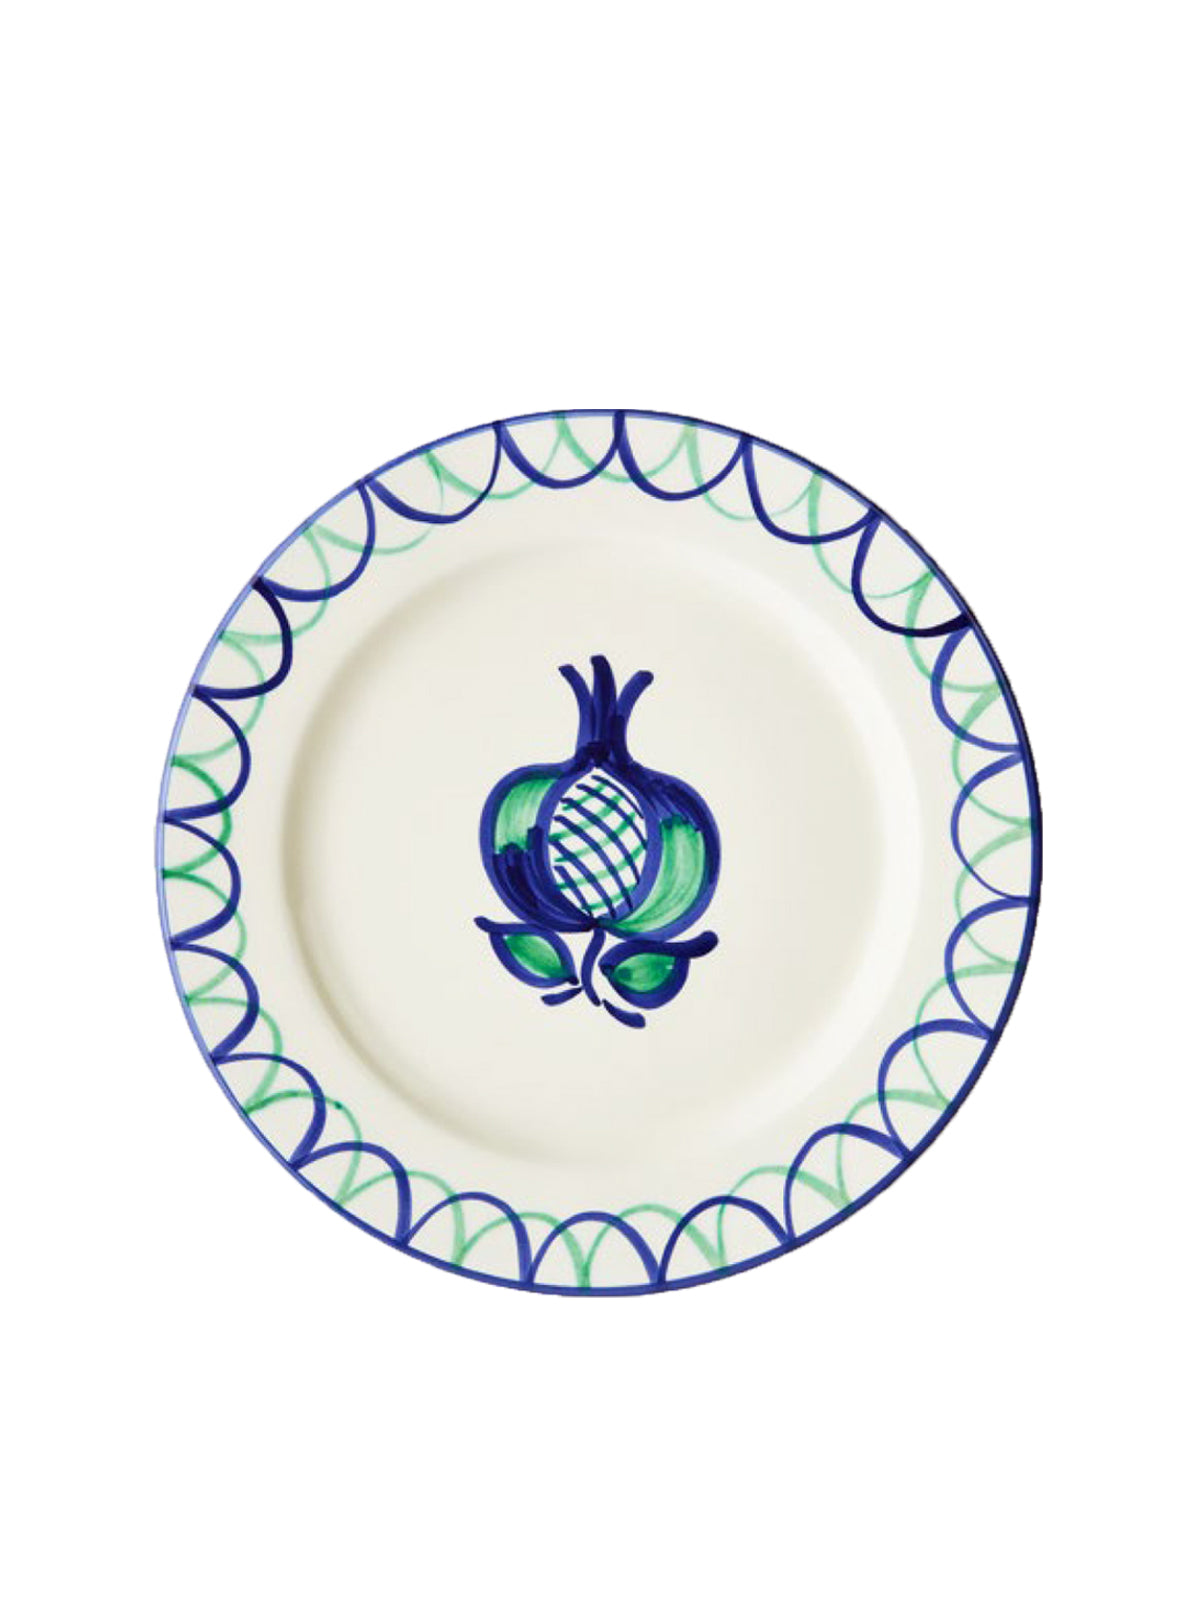 DINNER PLATE - POMEGRANATE WITH SCALLOP EDGE - Part of our Soho Home Collection